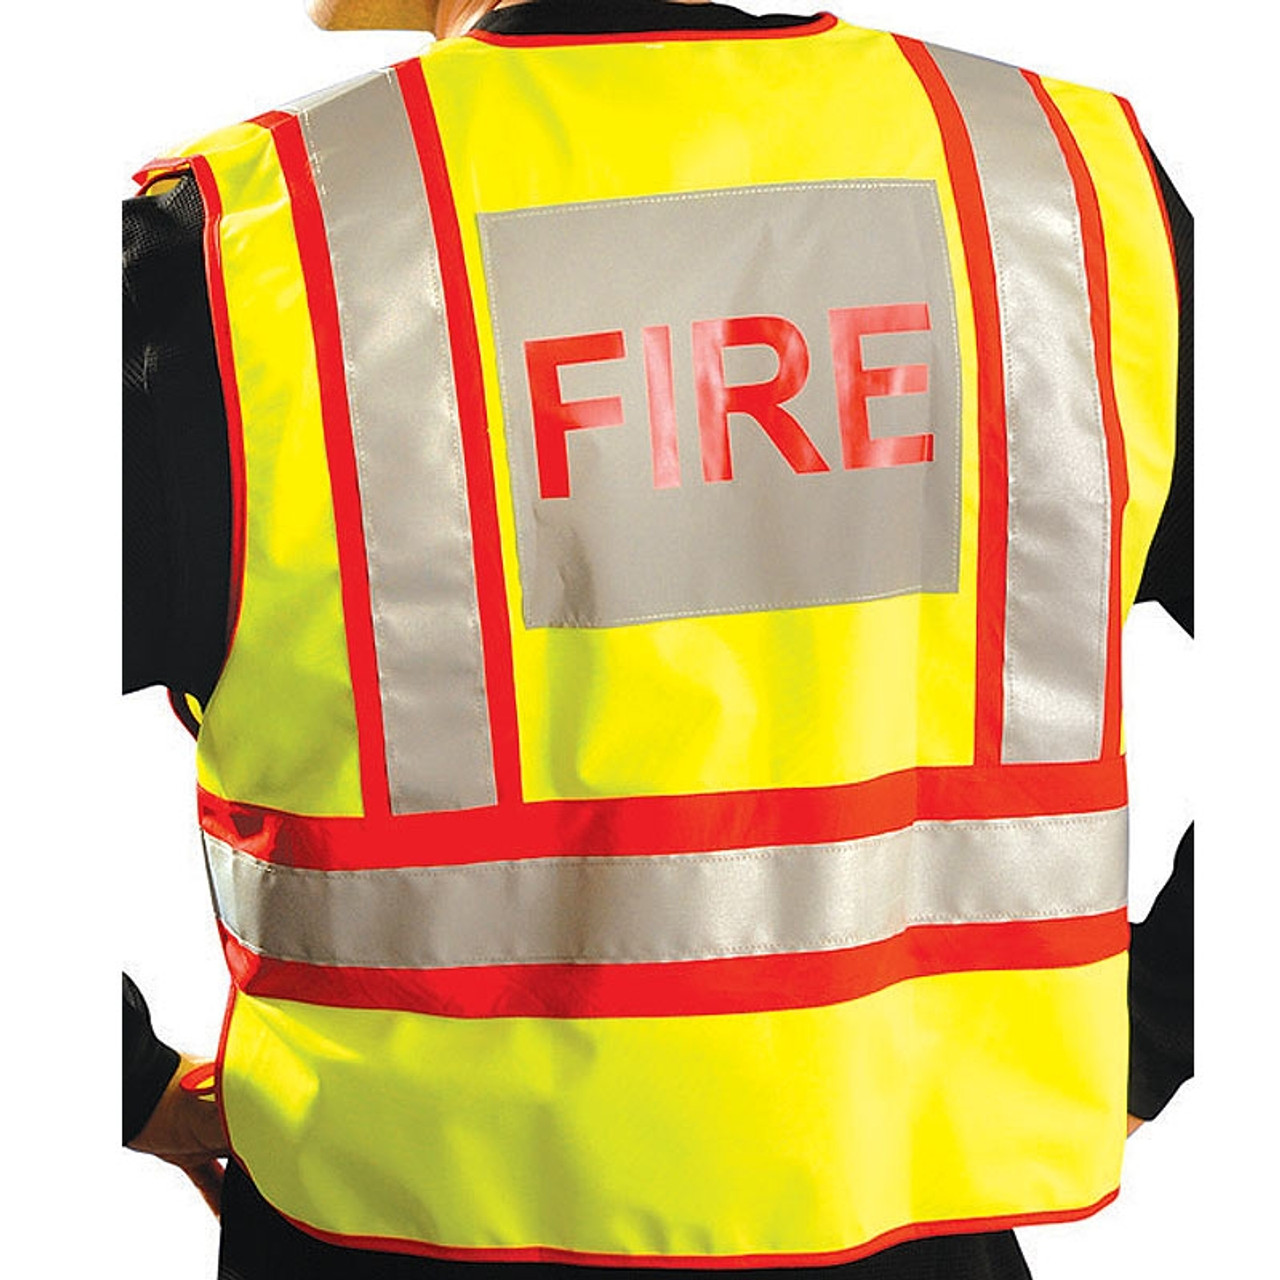 PRINTED FIRE OFFICER HIGH VISIBILITY VEST HI VIS VIZ SAFETY WAISTCOAT RED YELLOW 